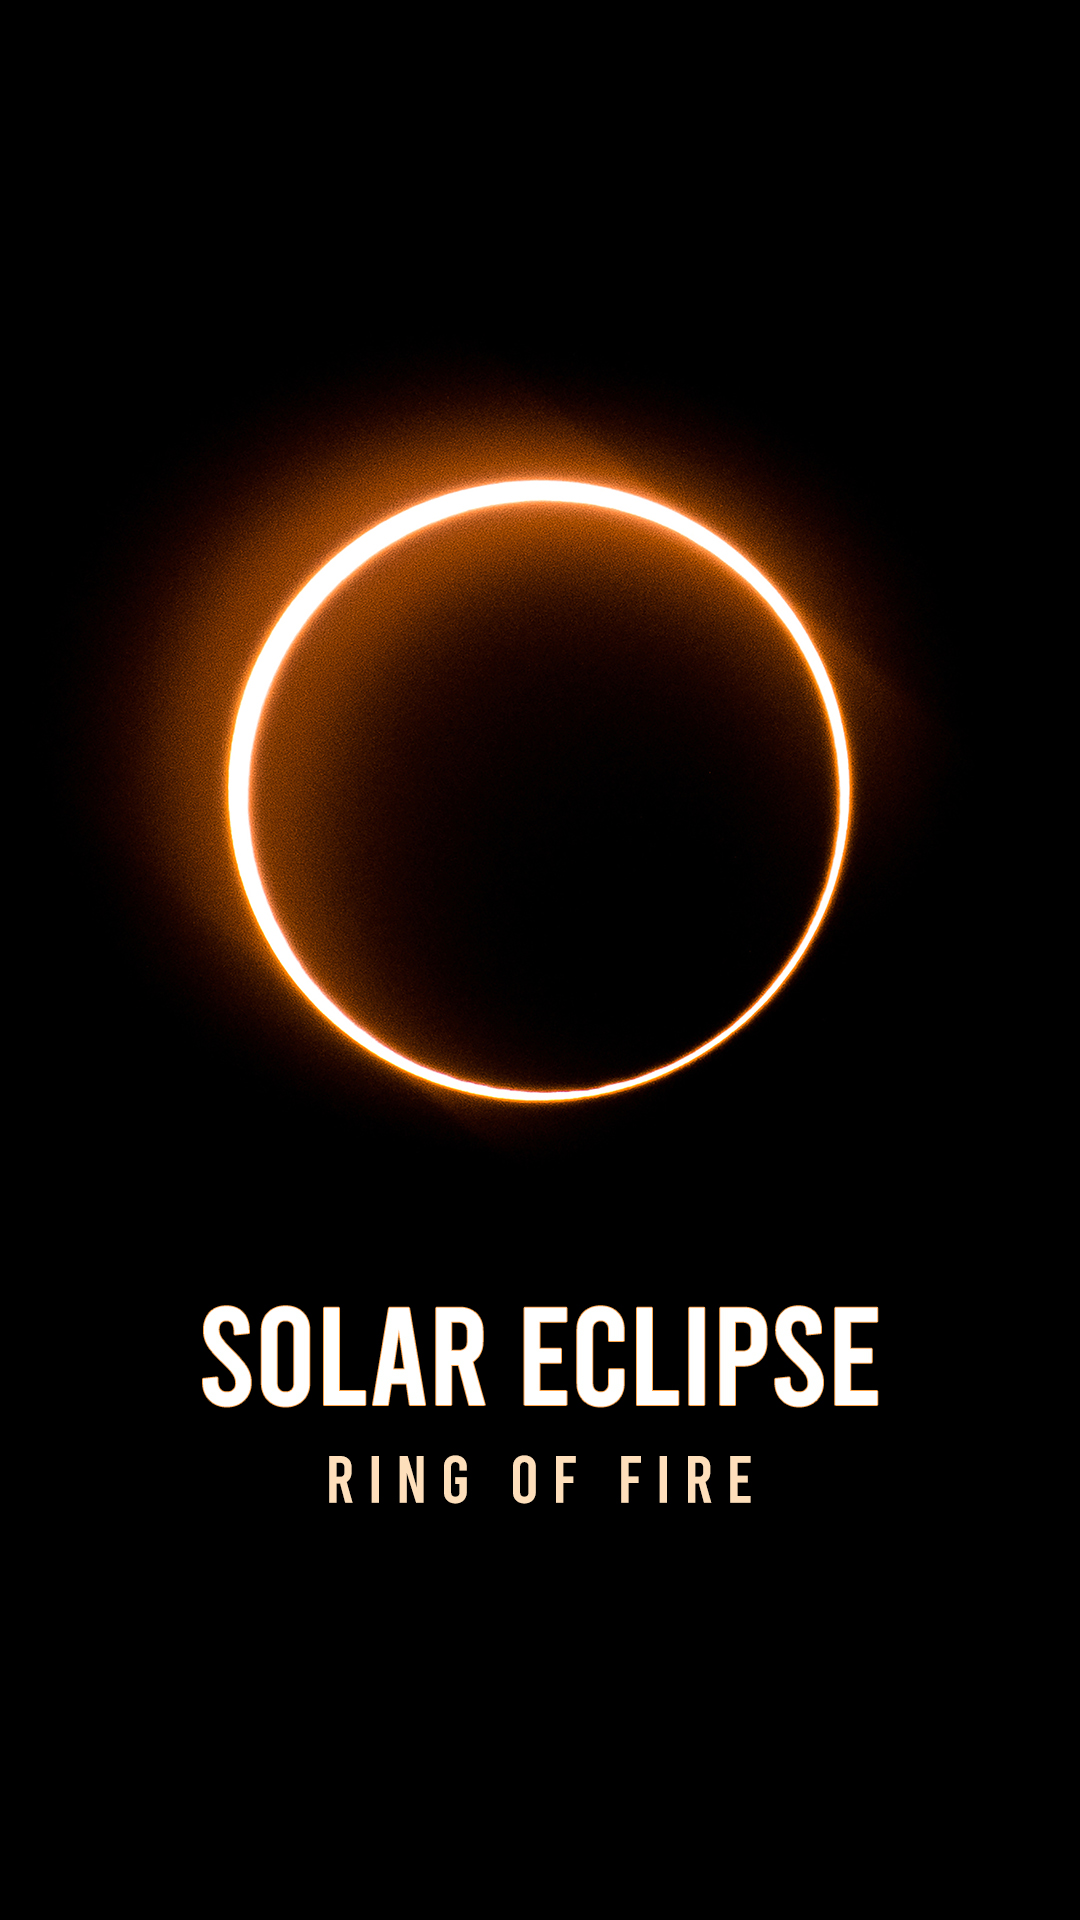 Solar Eclipse - Ring of Fire - Download Mobile Phone full HD wallpaper